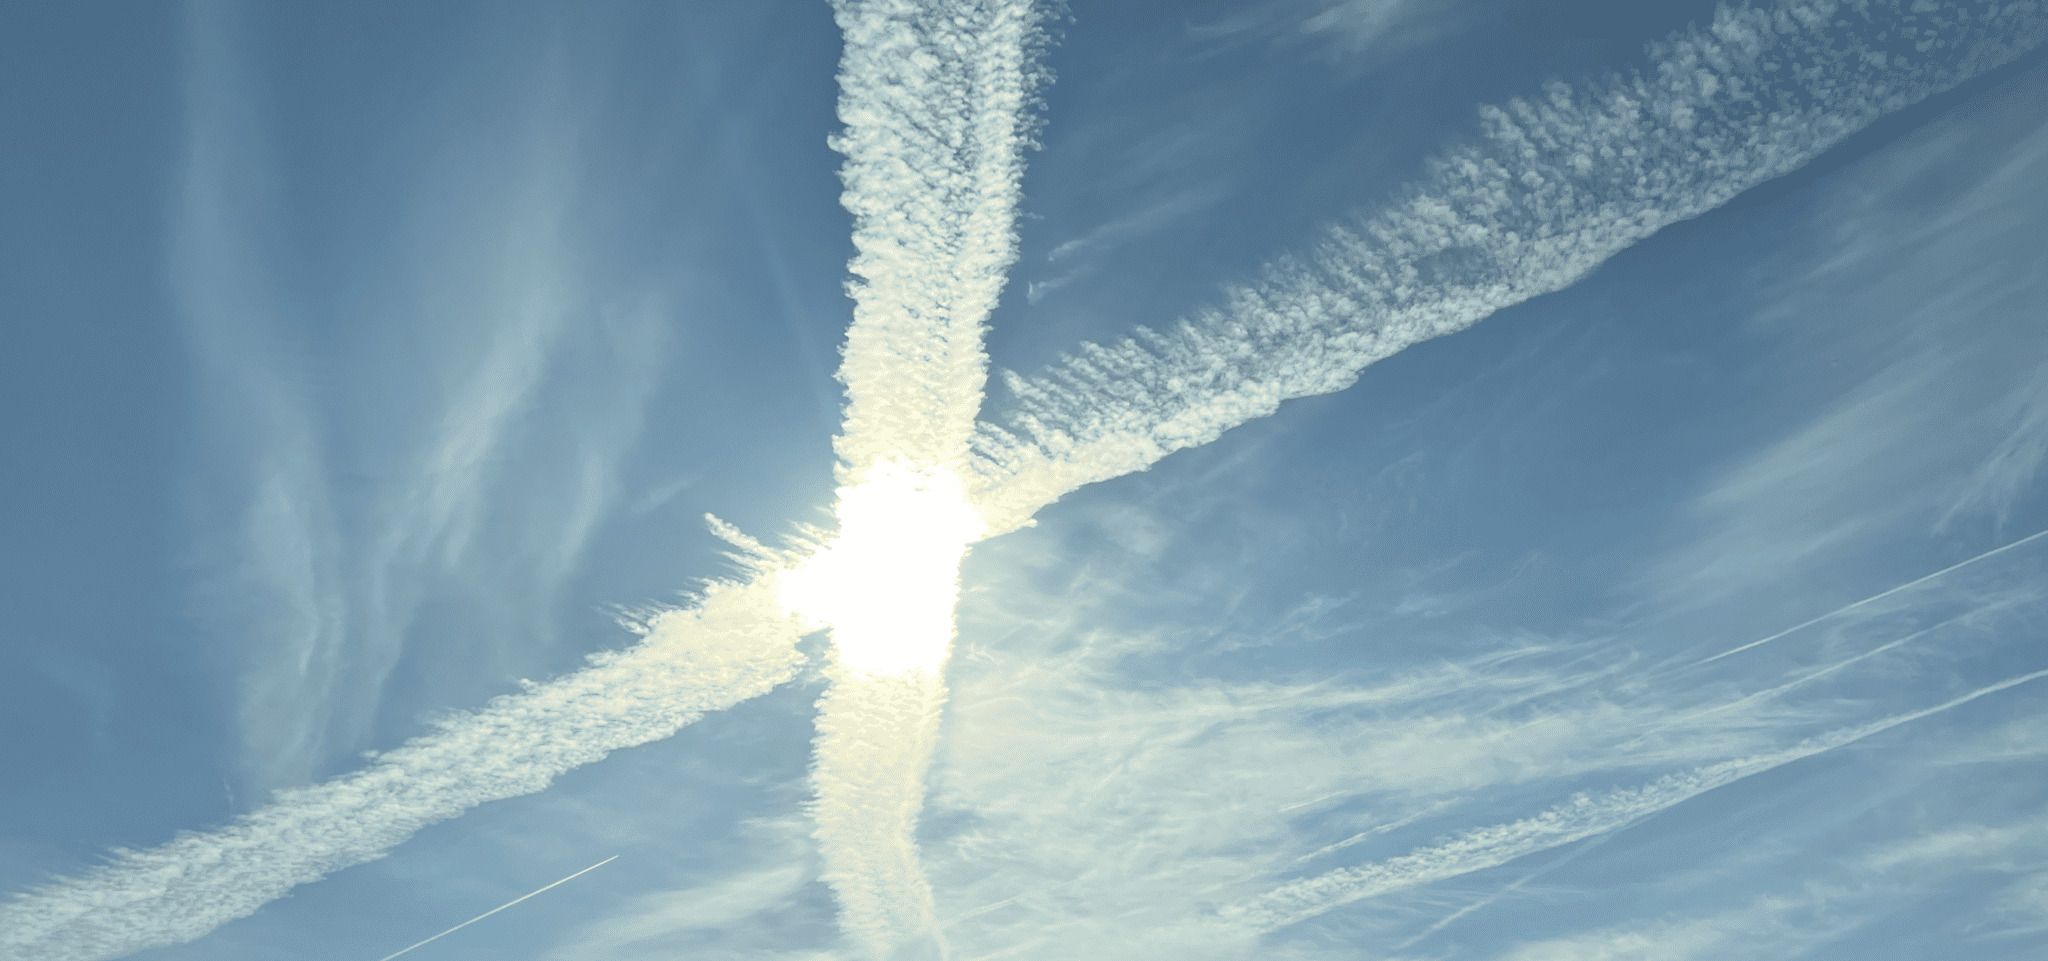 People Waking Up To Chemtrails Everywhere!